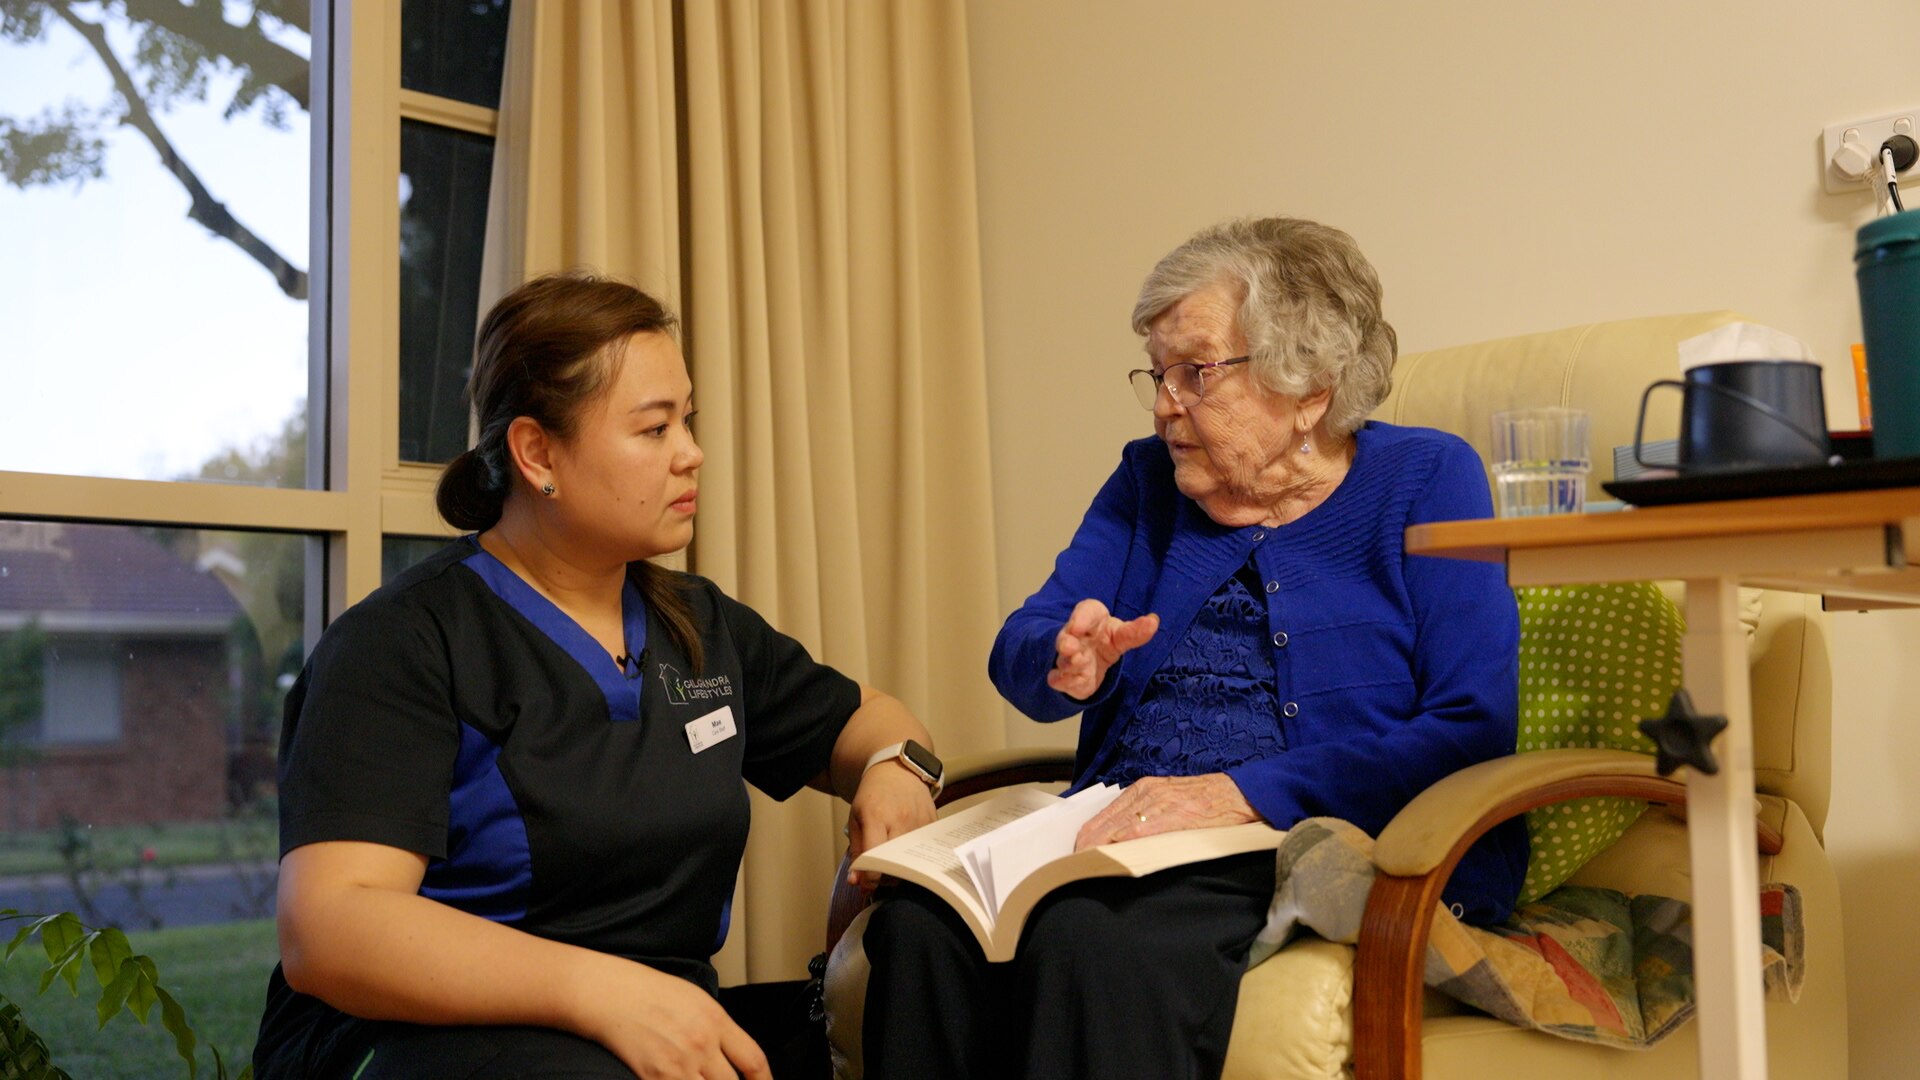 Female healthcare worker squats next to seated elderly woman in aged care facility who is holding a book.